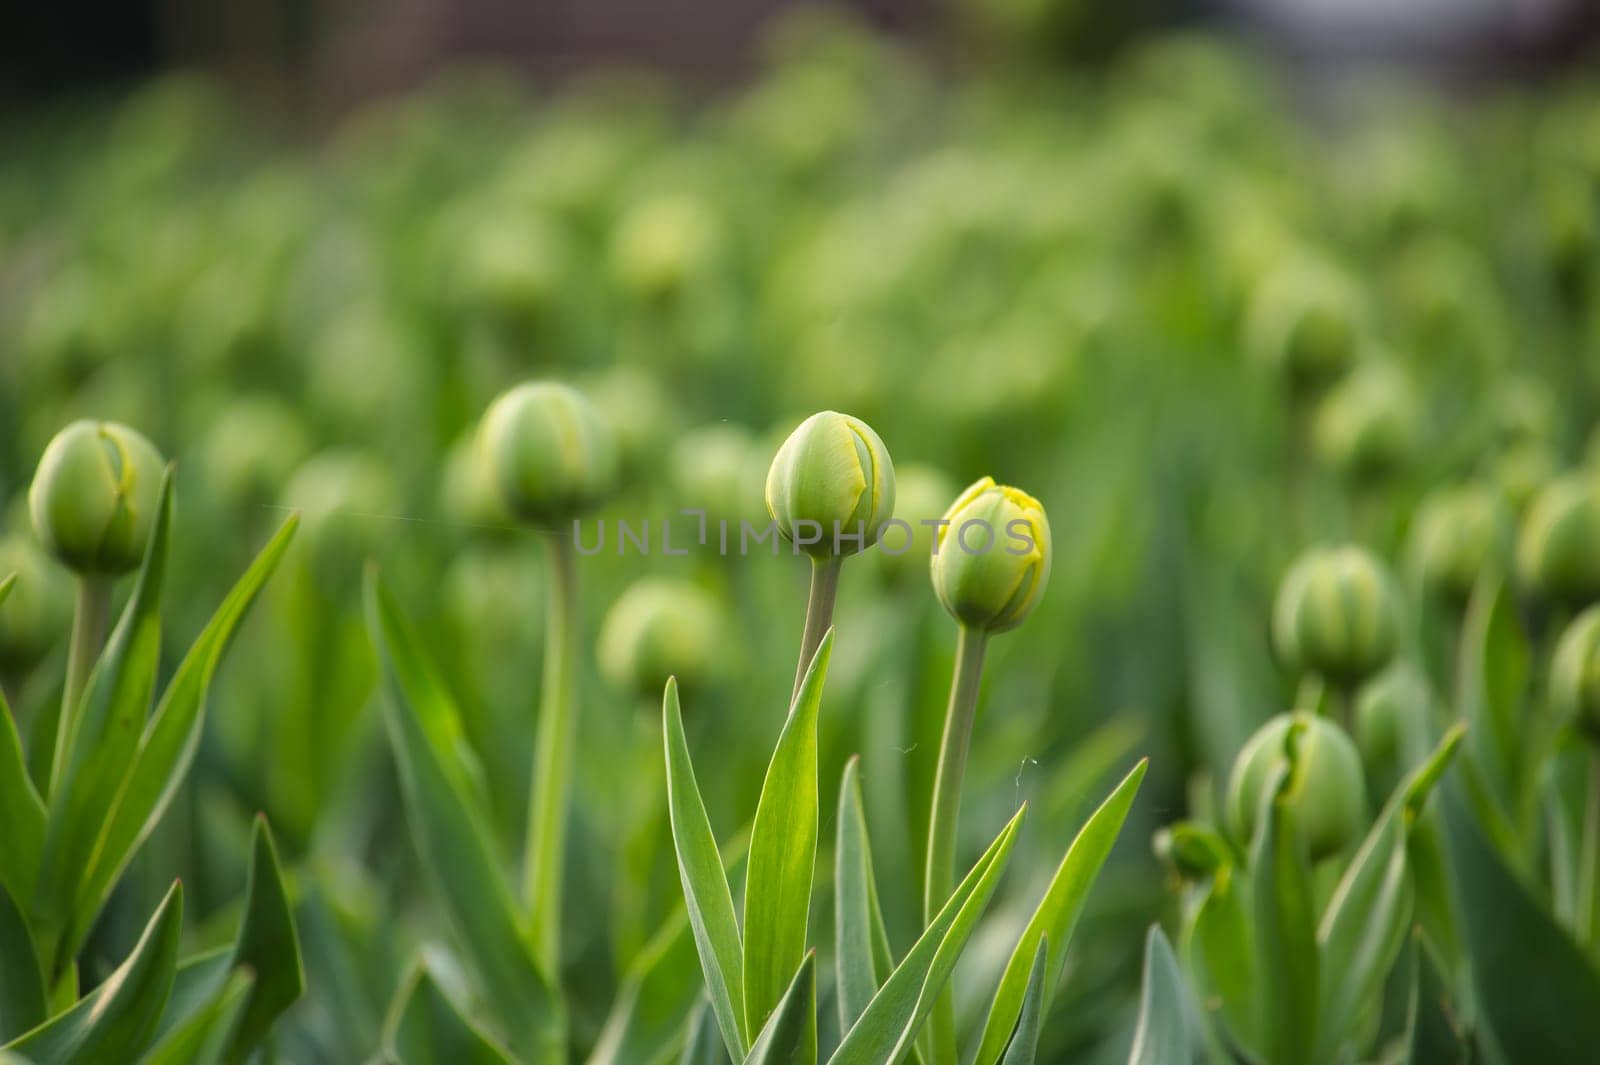 Tulips in the early stages of blooming, hues of green in the tulips are prominent, reflecting a fresh and vibrant scene